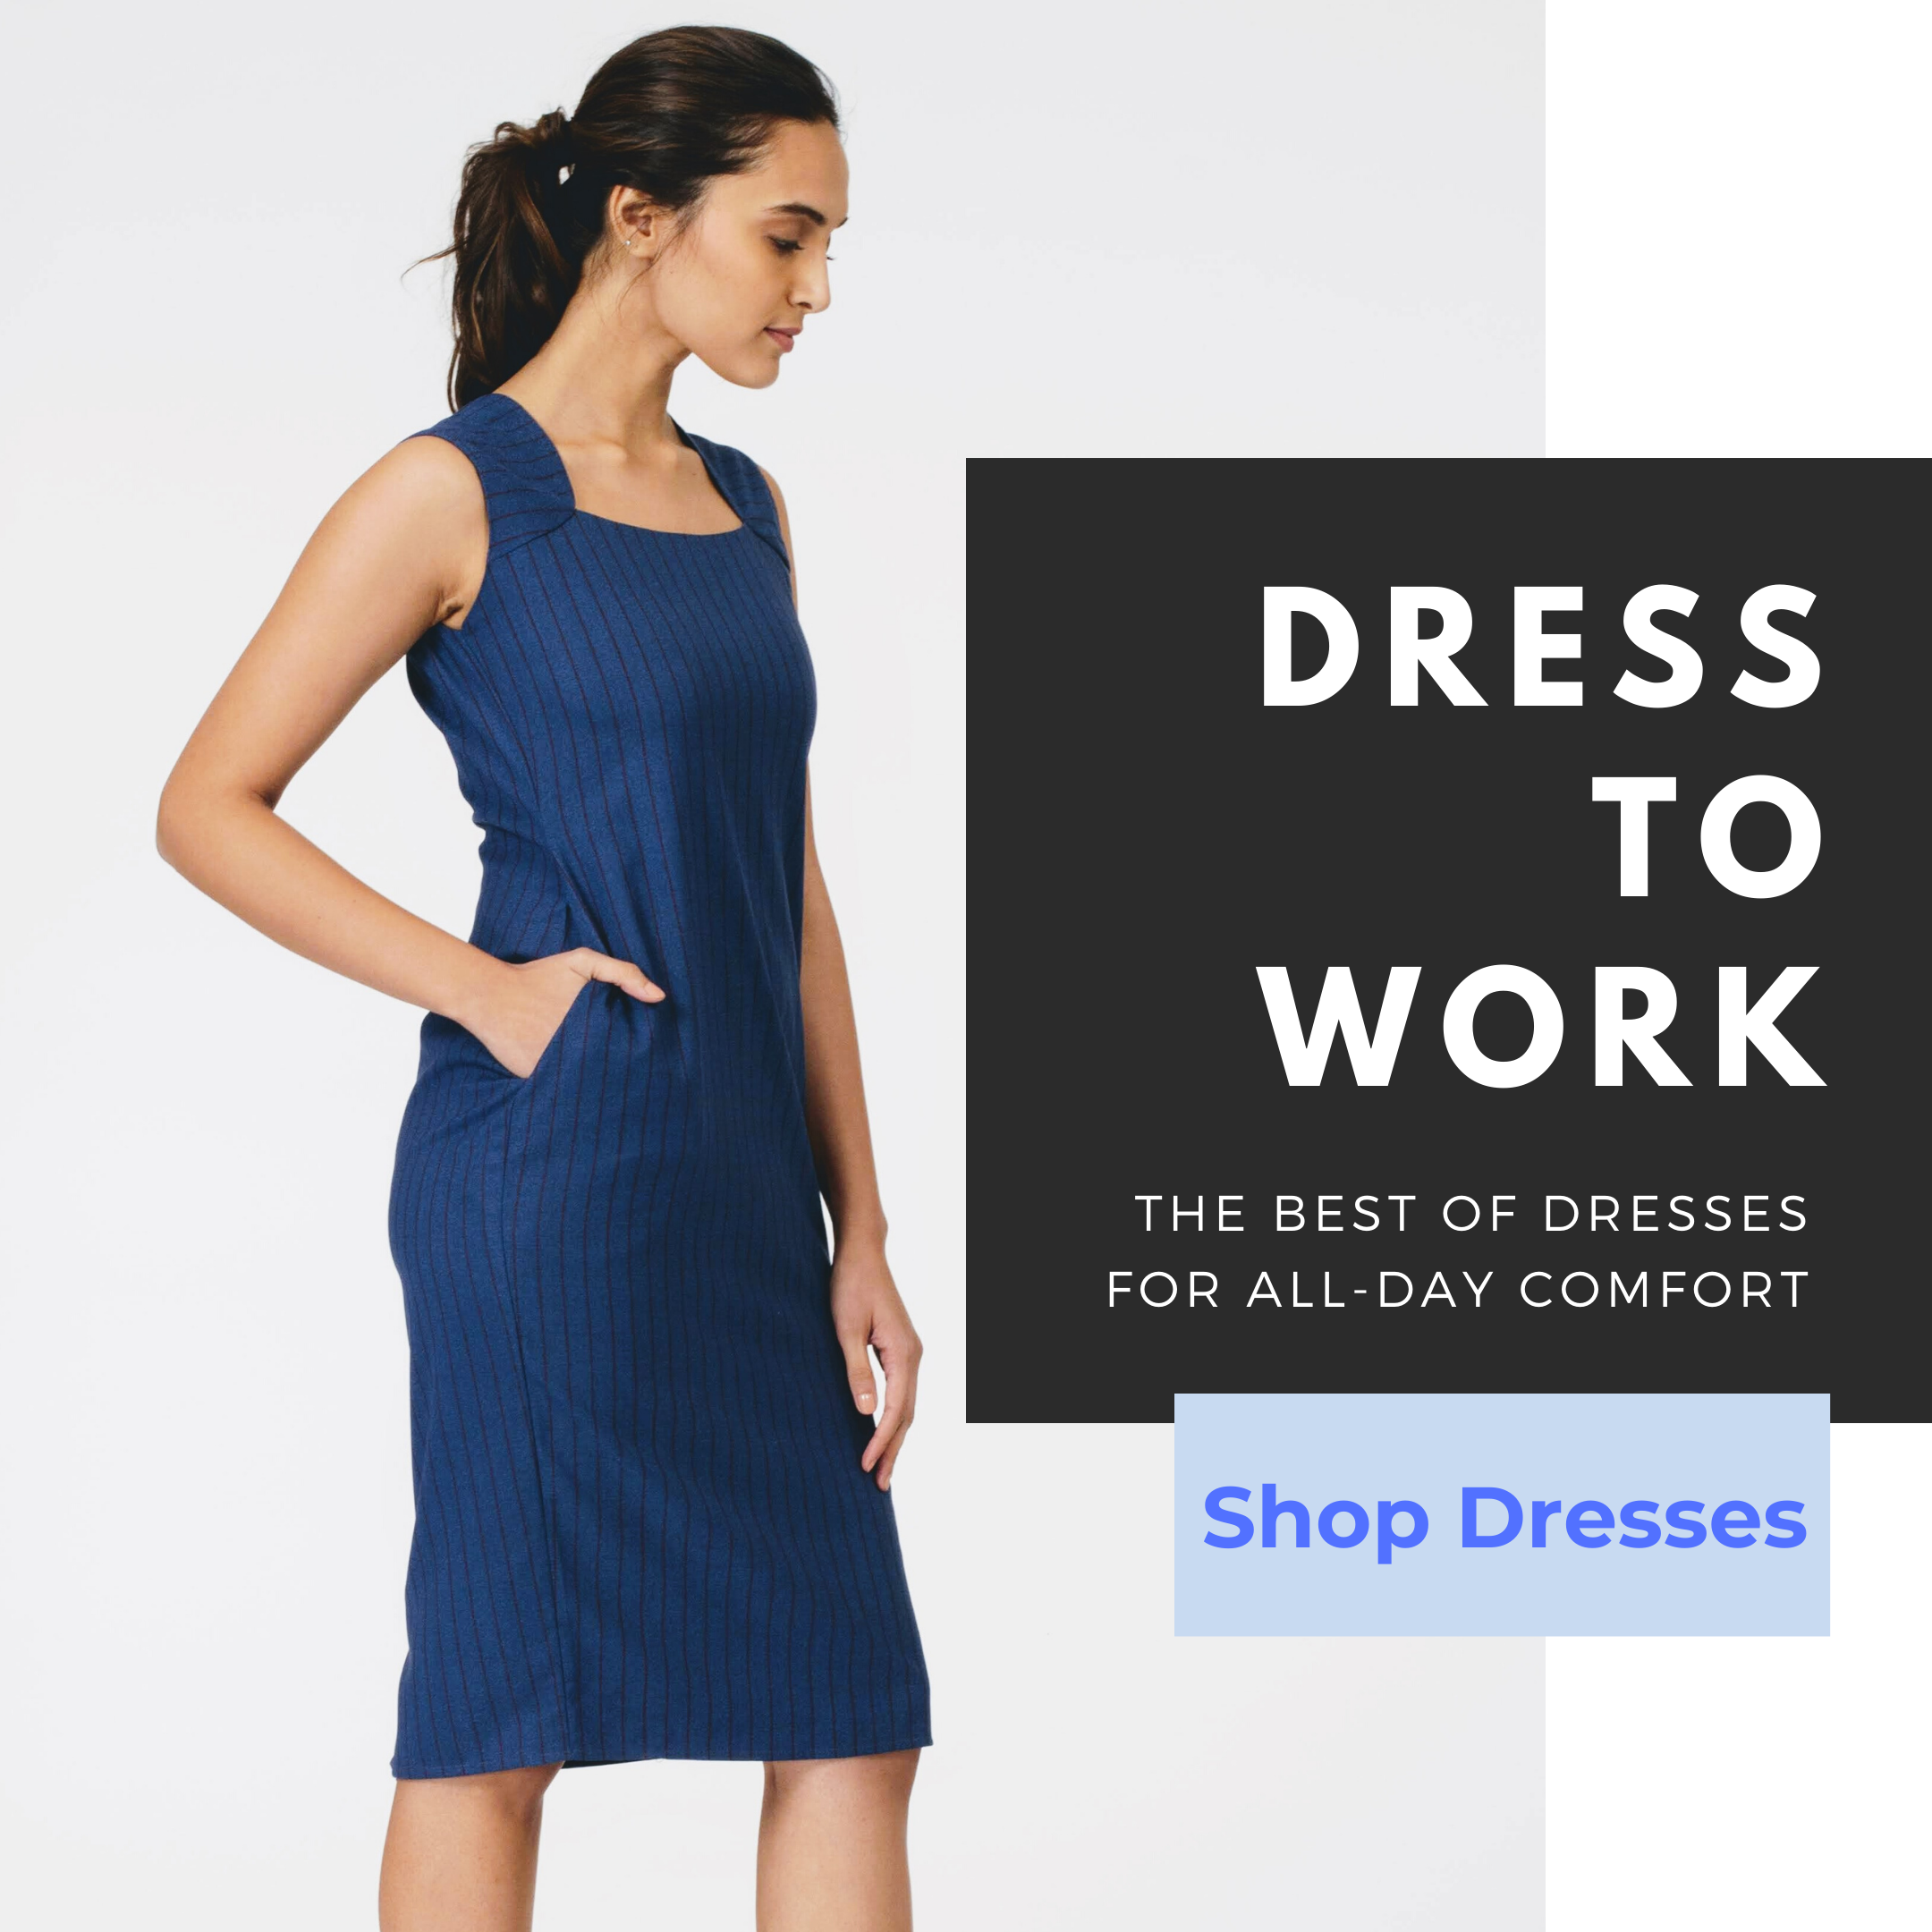 Women's Formal Wear: Dresses, Tops, Trousers, Suits & more